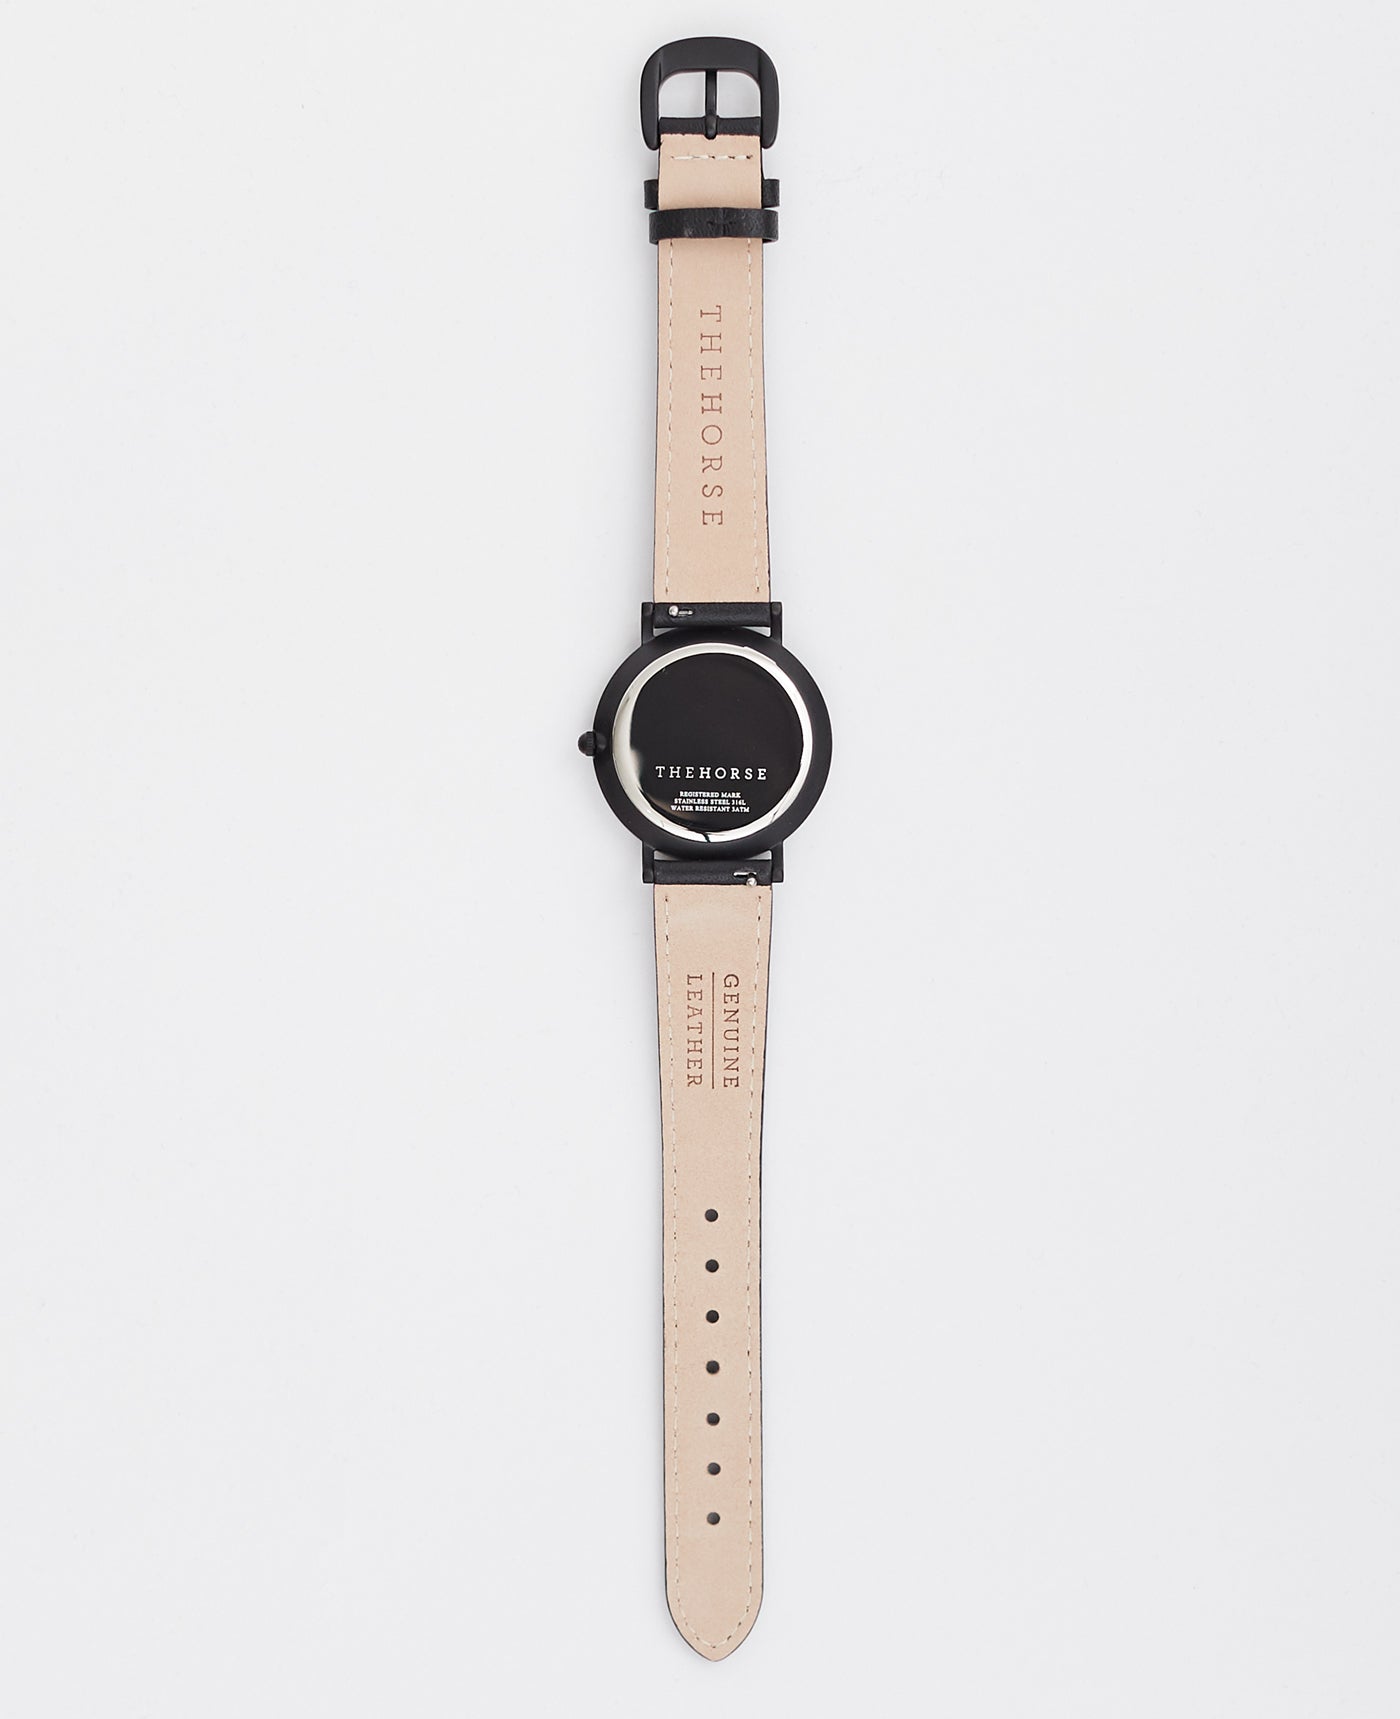 The Classic: Matte Black Case / Black Dial Rose Gold Indexing / Black Leather